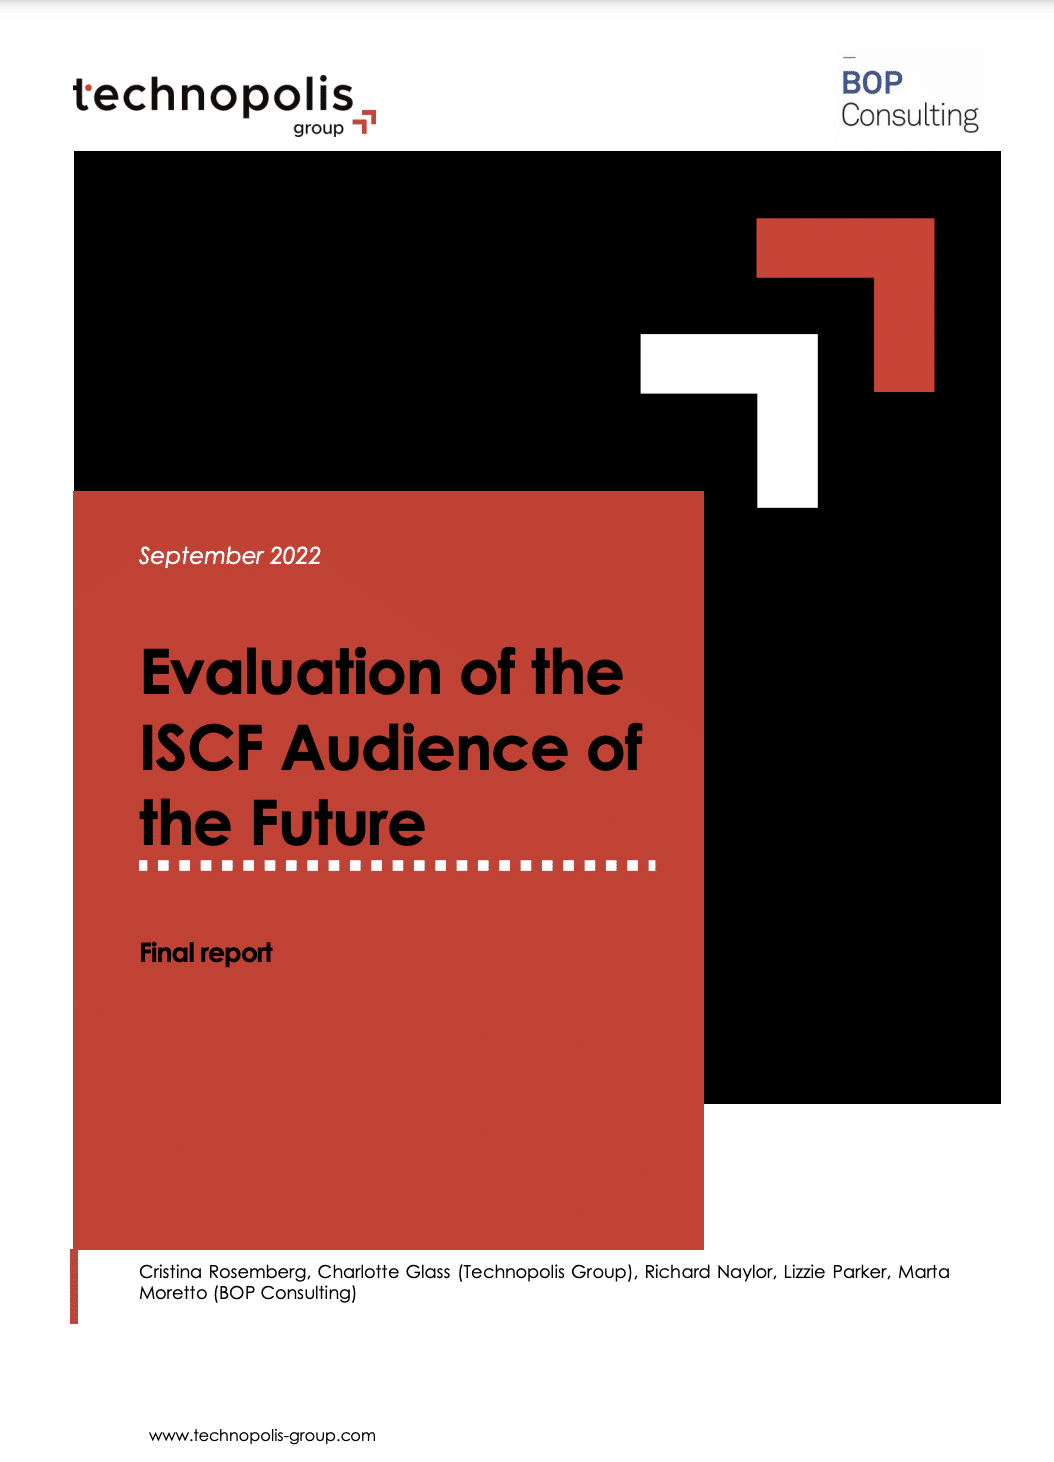 The final evaluation of the Audience of the Future (AotF) programme